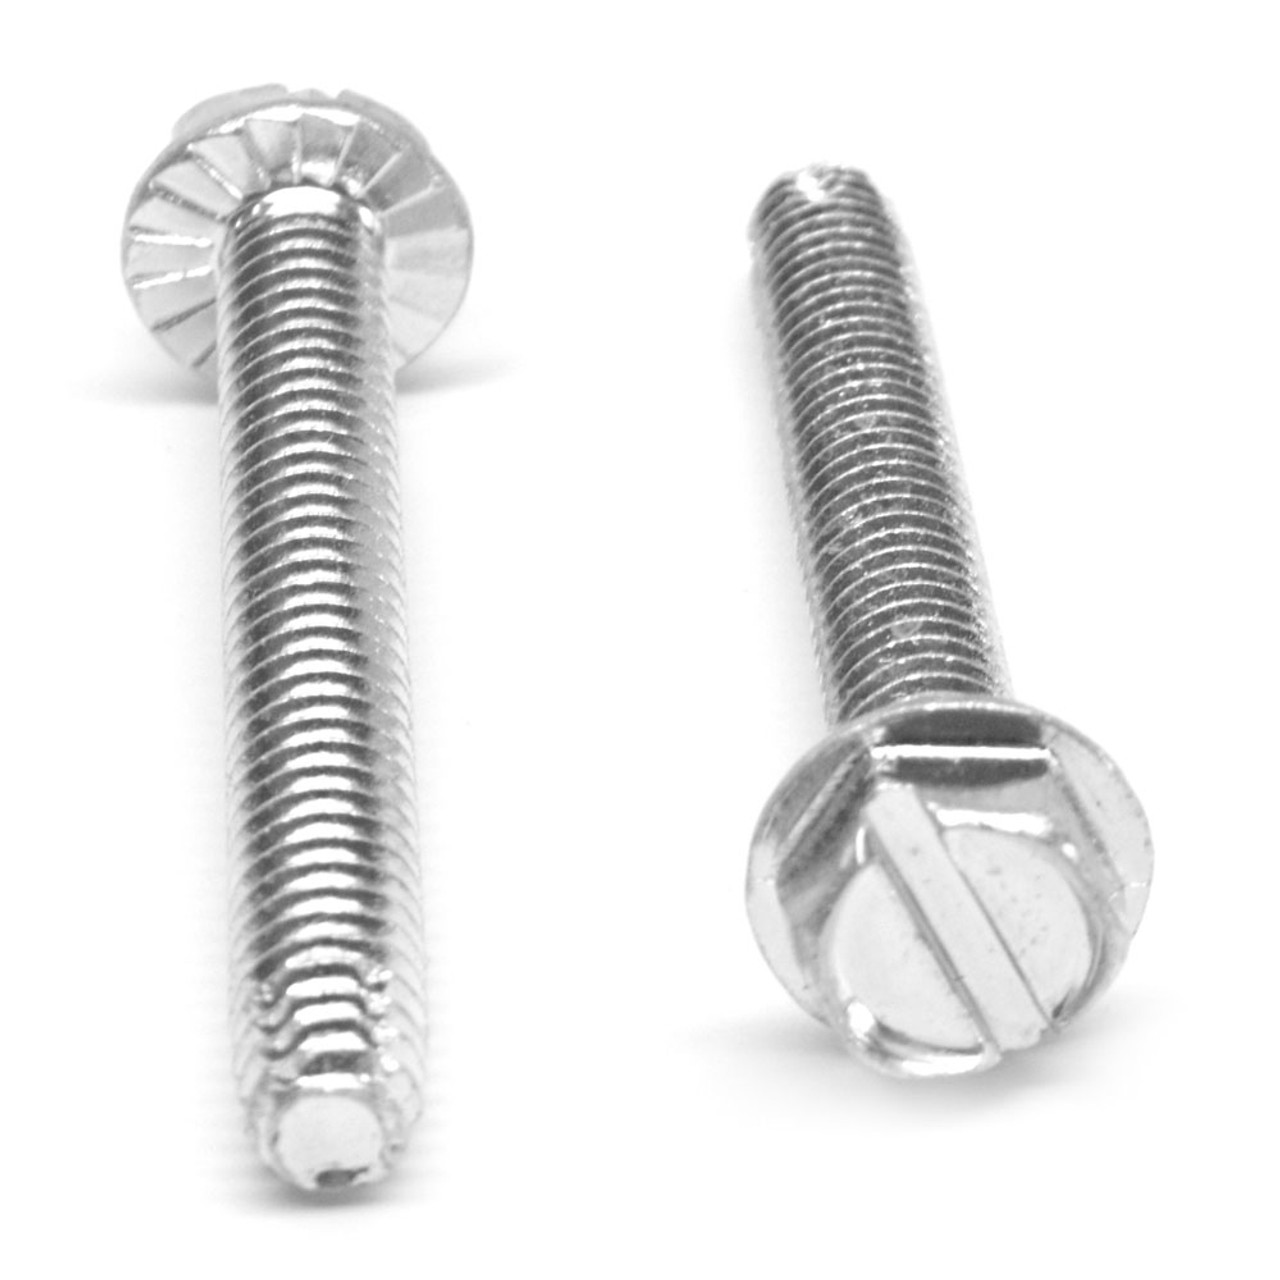 #8-32 x 1/4" (FT) Coarse Thread Thread Cutting Screw Slotted Hex Washer Head with Serration Type F Low Carbon Steel Zinc Plated